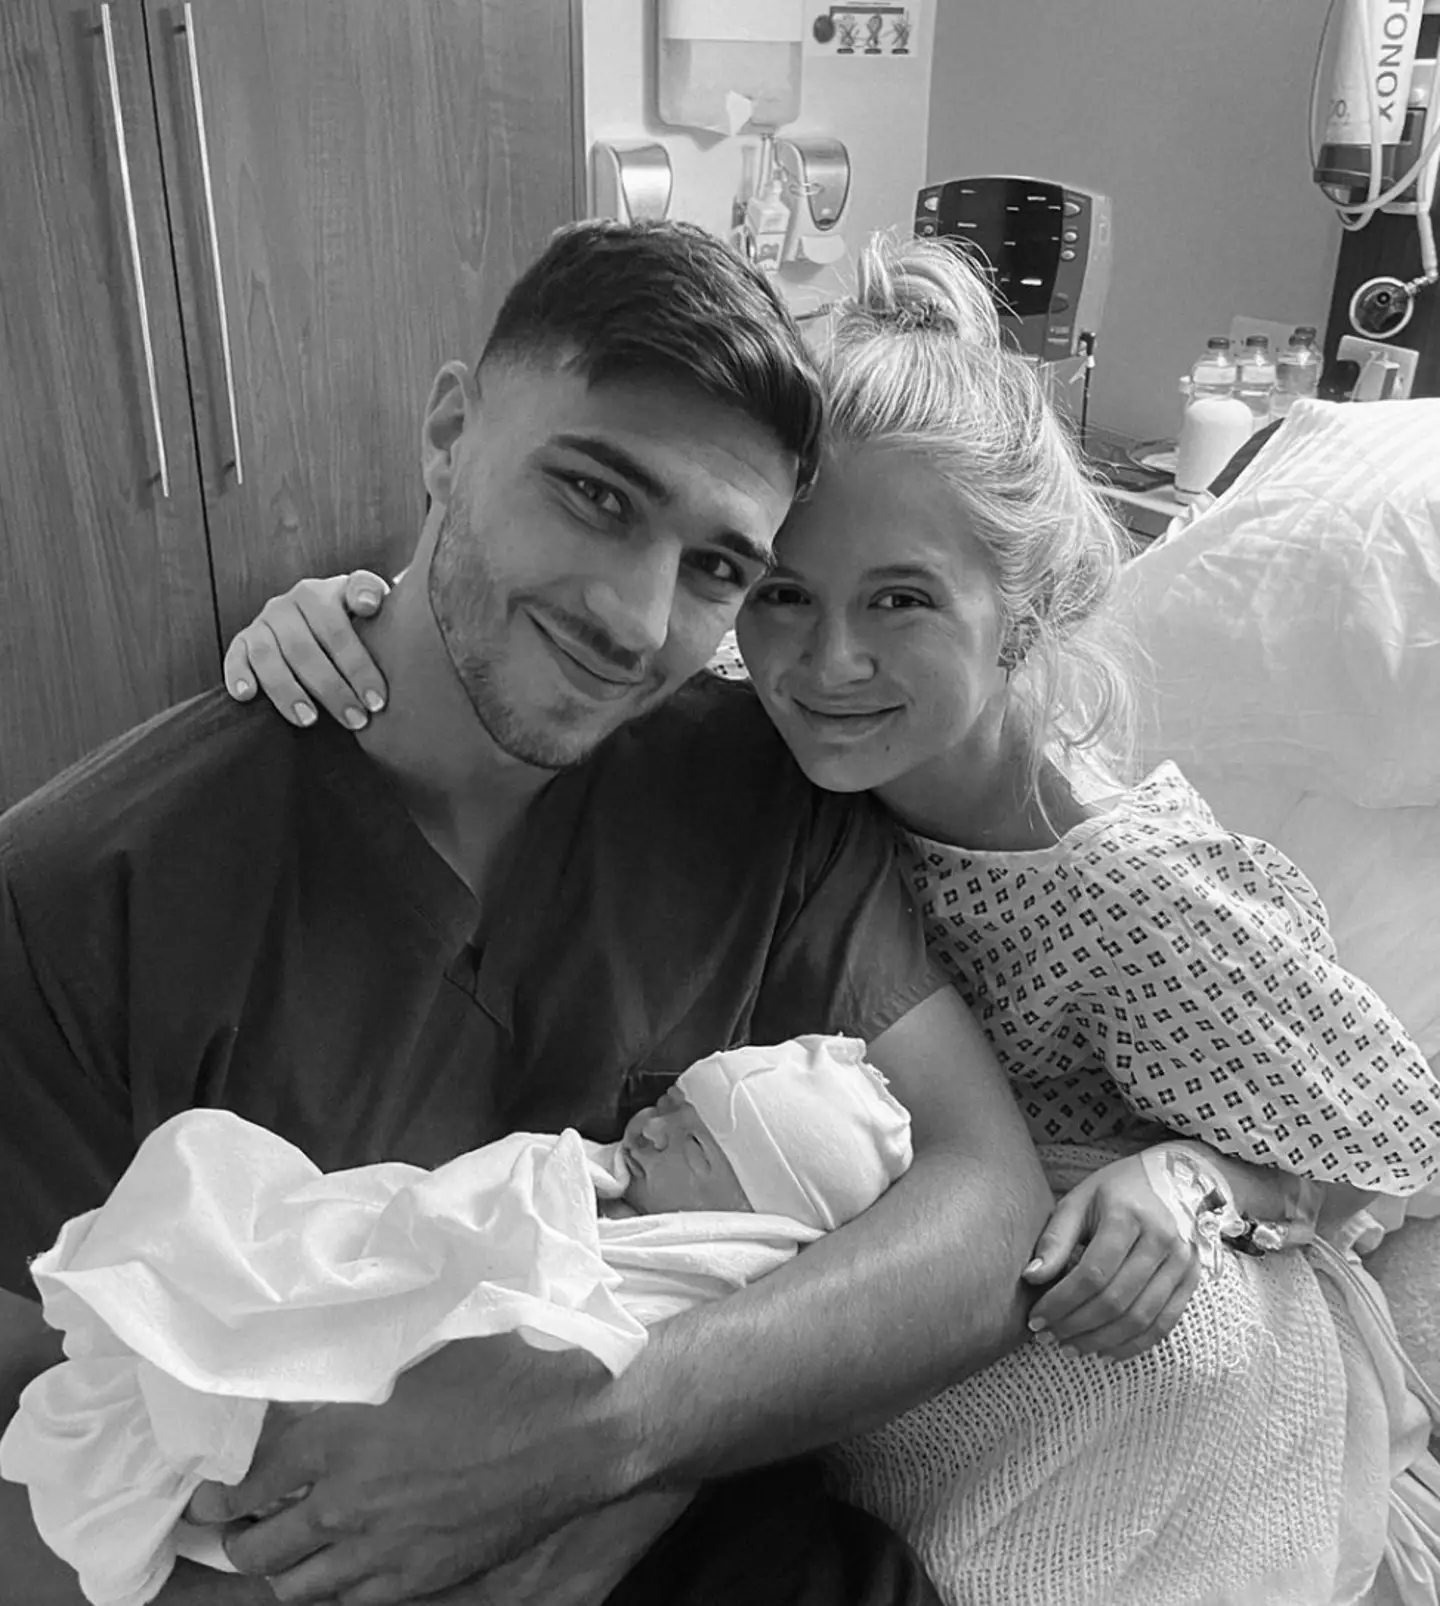 Molly-Mae Hague & Tommy Fury with their newborn daughter in hospital.